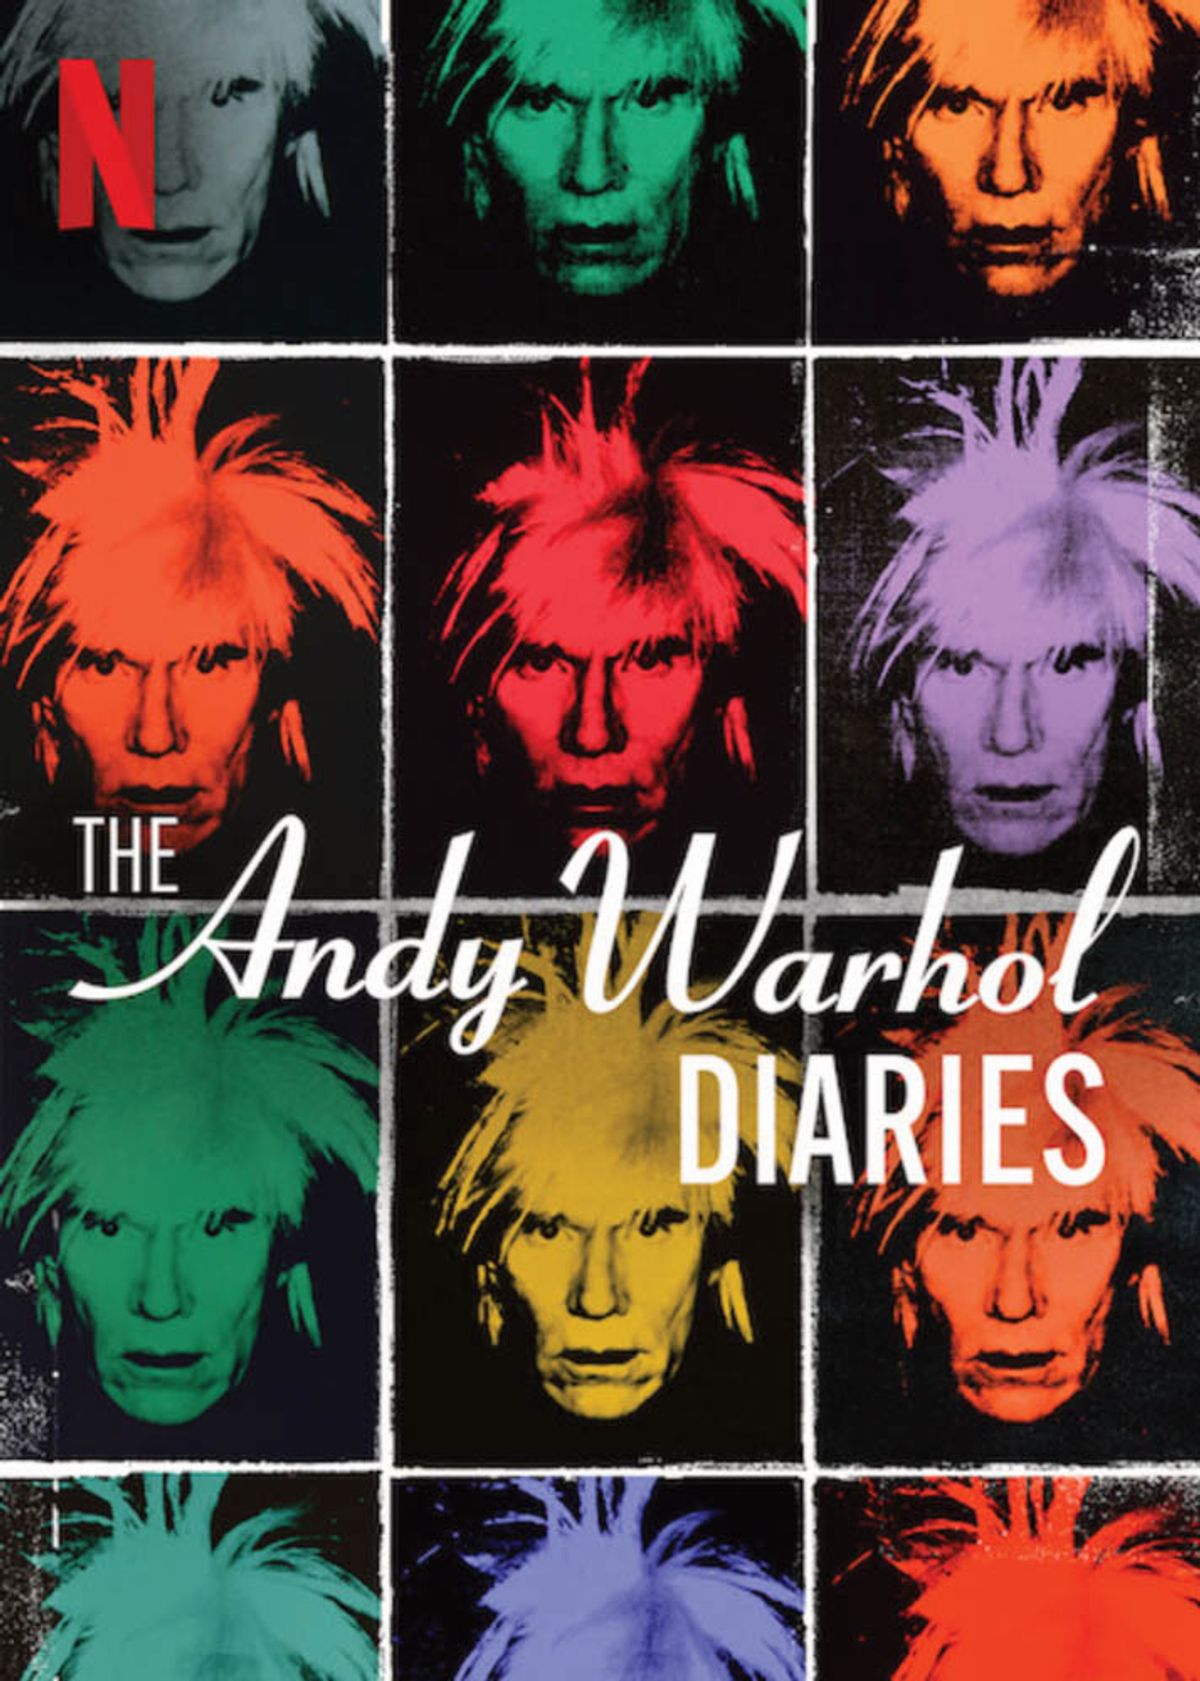 The Andy Warhol Diaries is streaming on Netflix. 